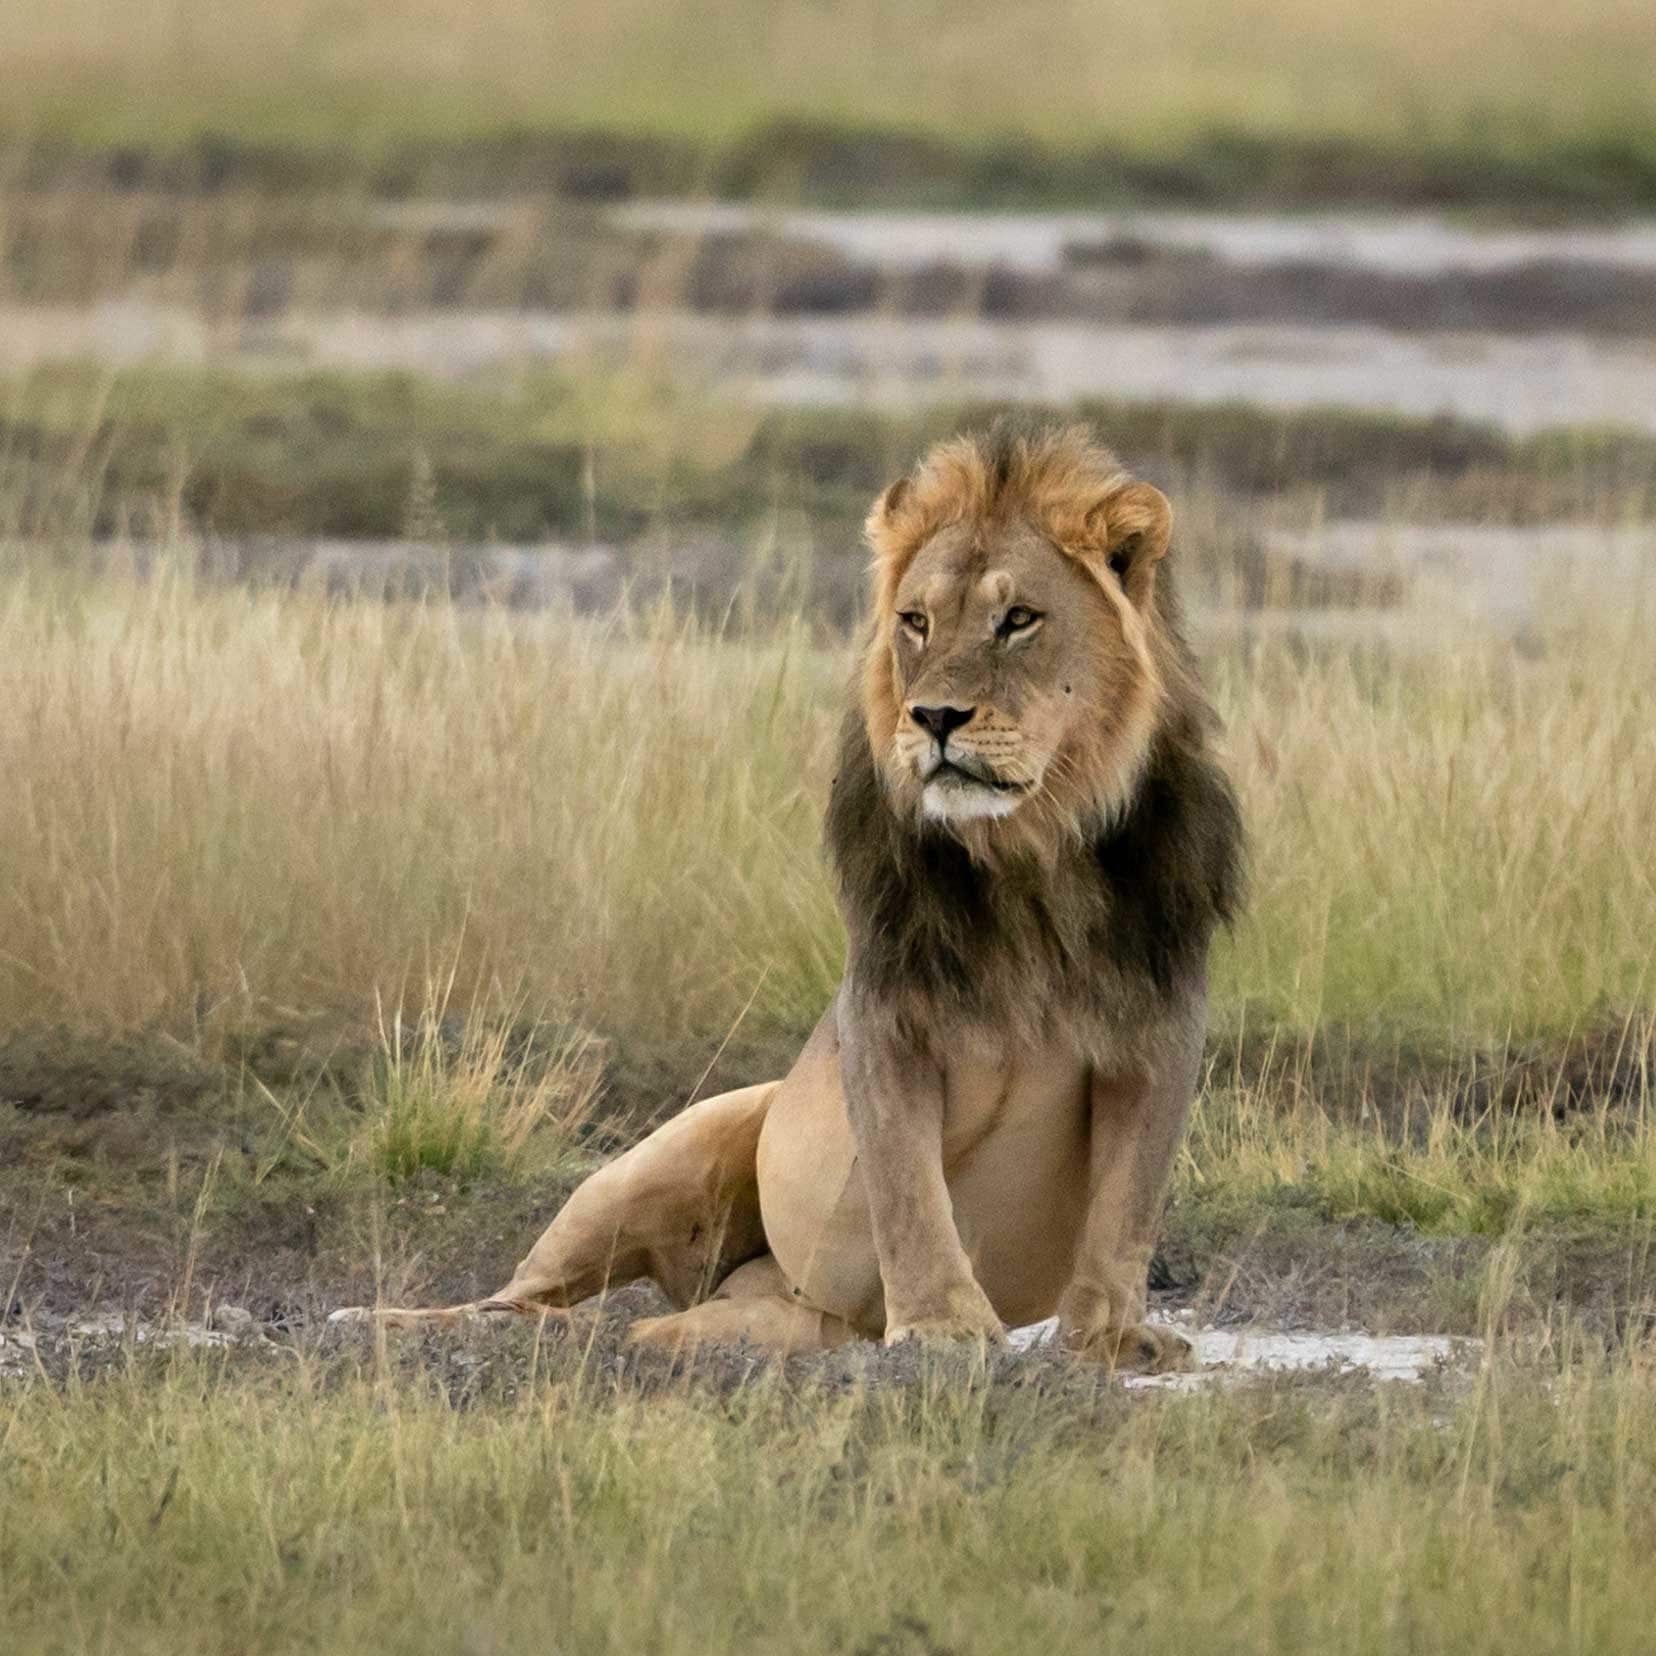 Lion-at-mpaya-looking-pregnant because he is so full